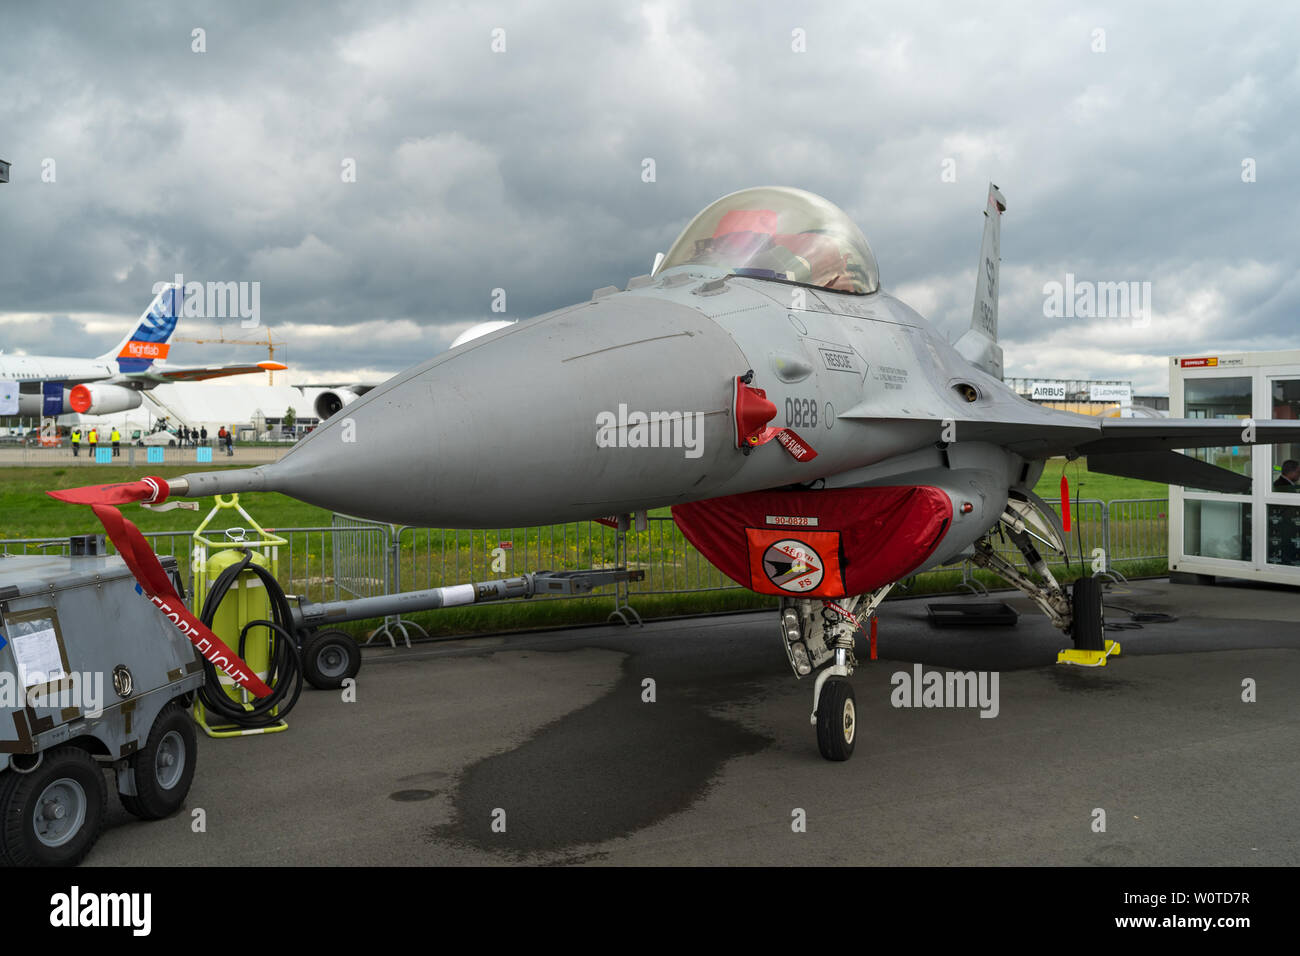 BERLIN - APRIL 26, 2018: Multirole fighter, air superiority fighter General Dynamics F-16 Fighting Falcon. US Air Force. Exhibition ILA Berlin Air Show 2018. Stock Photo